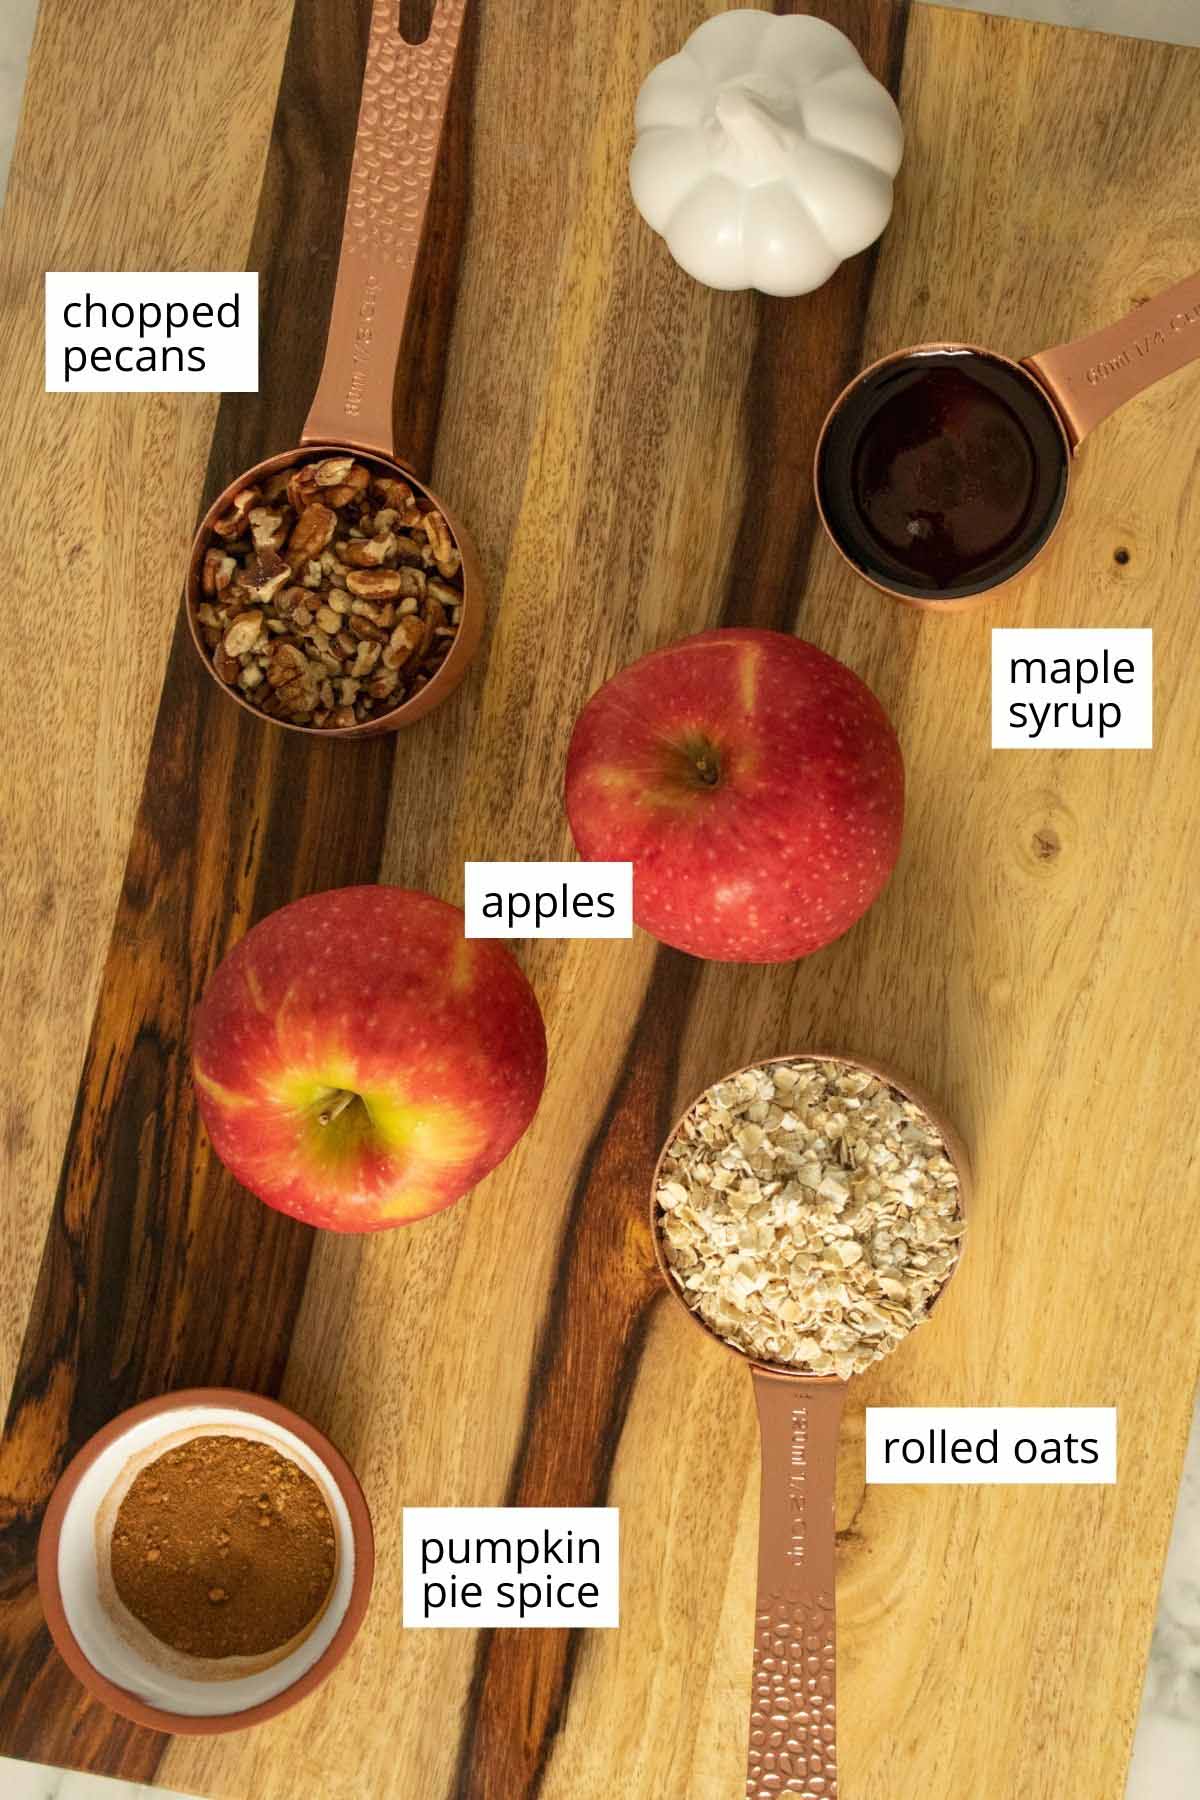 apples, maple syrup, oats, pumpkin pie spice, and pecans on a wooden cutting board. Text labels on each ingredient